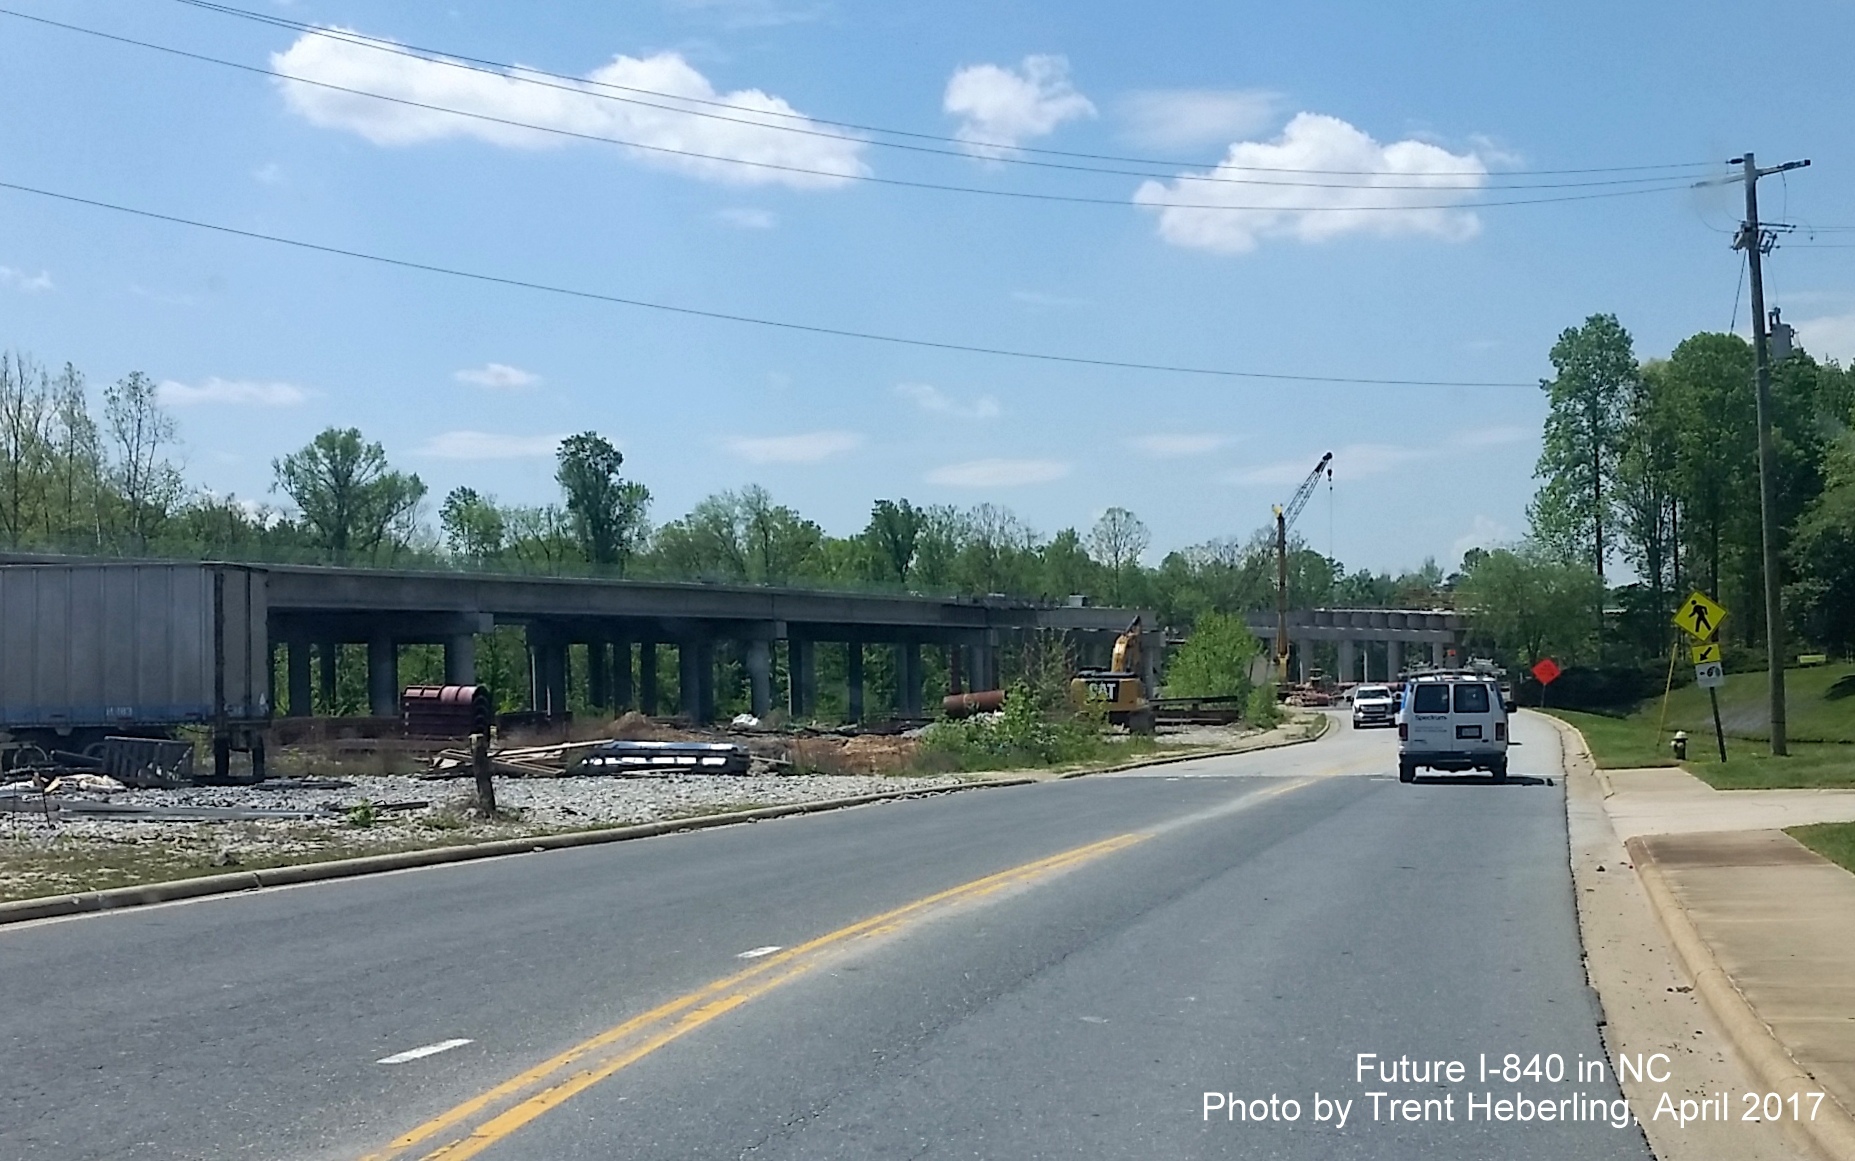 Image of view of Future I-840 elevated freeway from Drawbridge Rd in Greensboro, by Trent Heberling